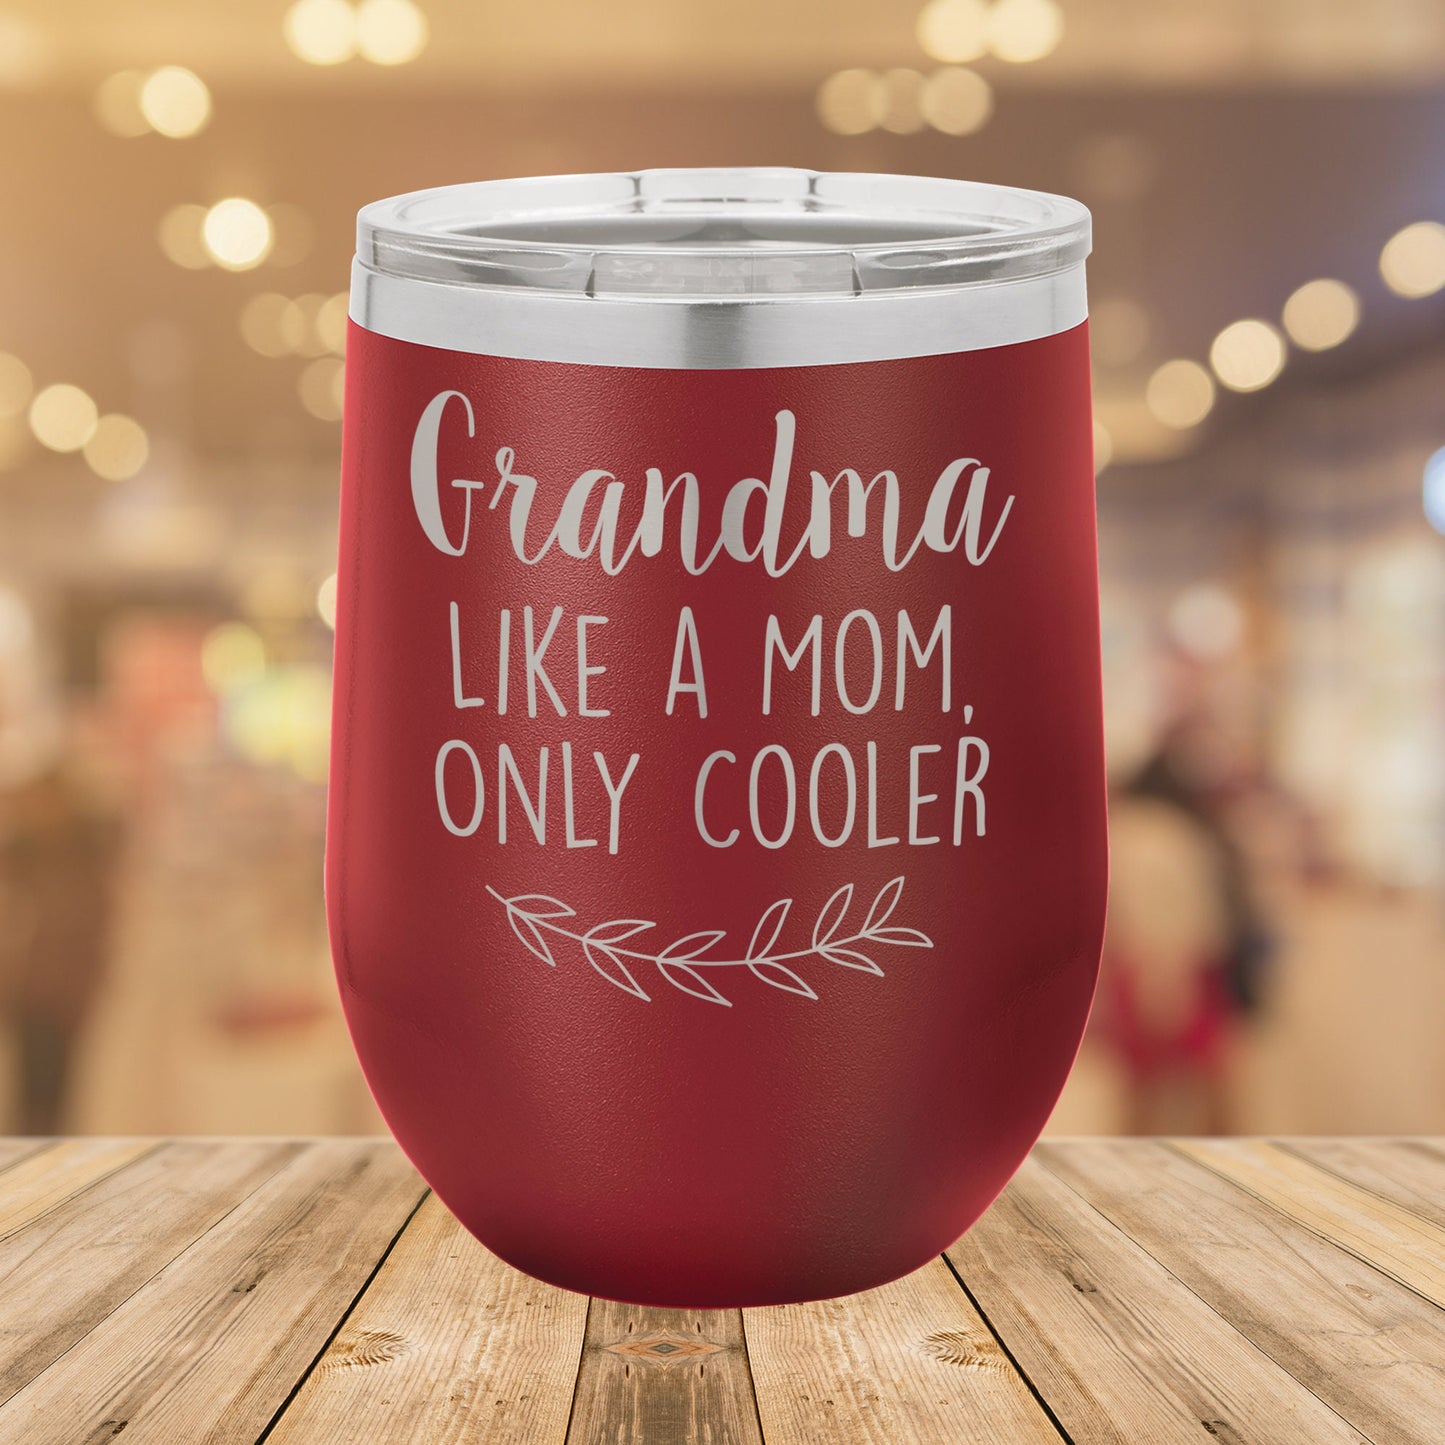 Grandma Like a Mom, Only Cooler 12 oz. Stainless Steel Stemless Wine Glass